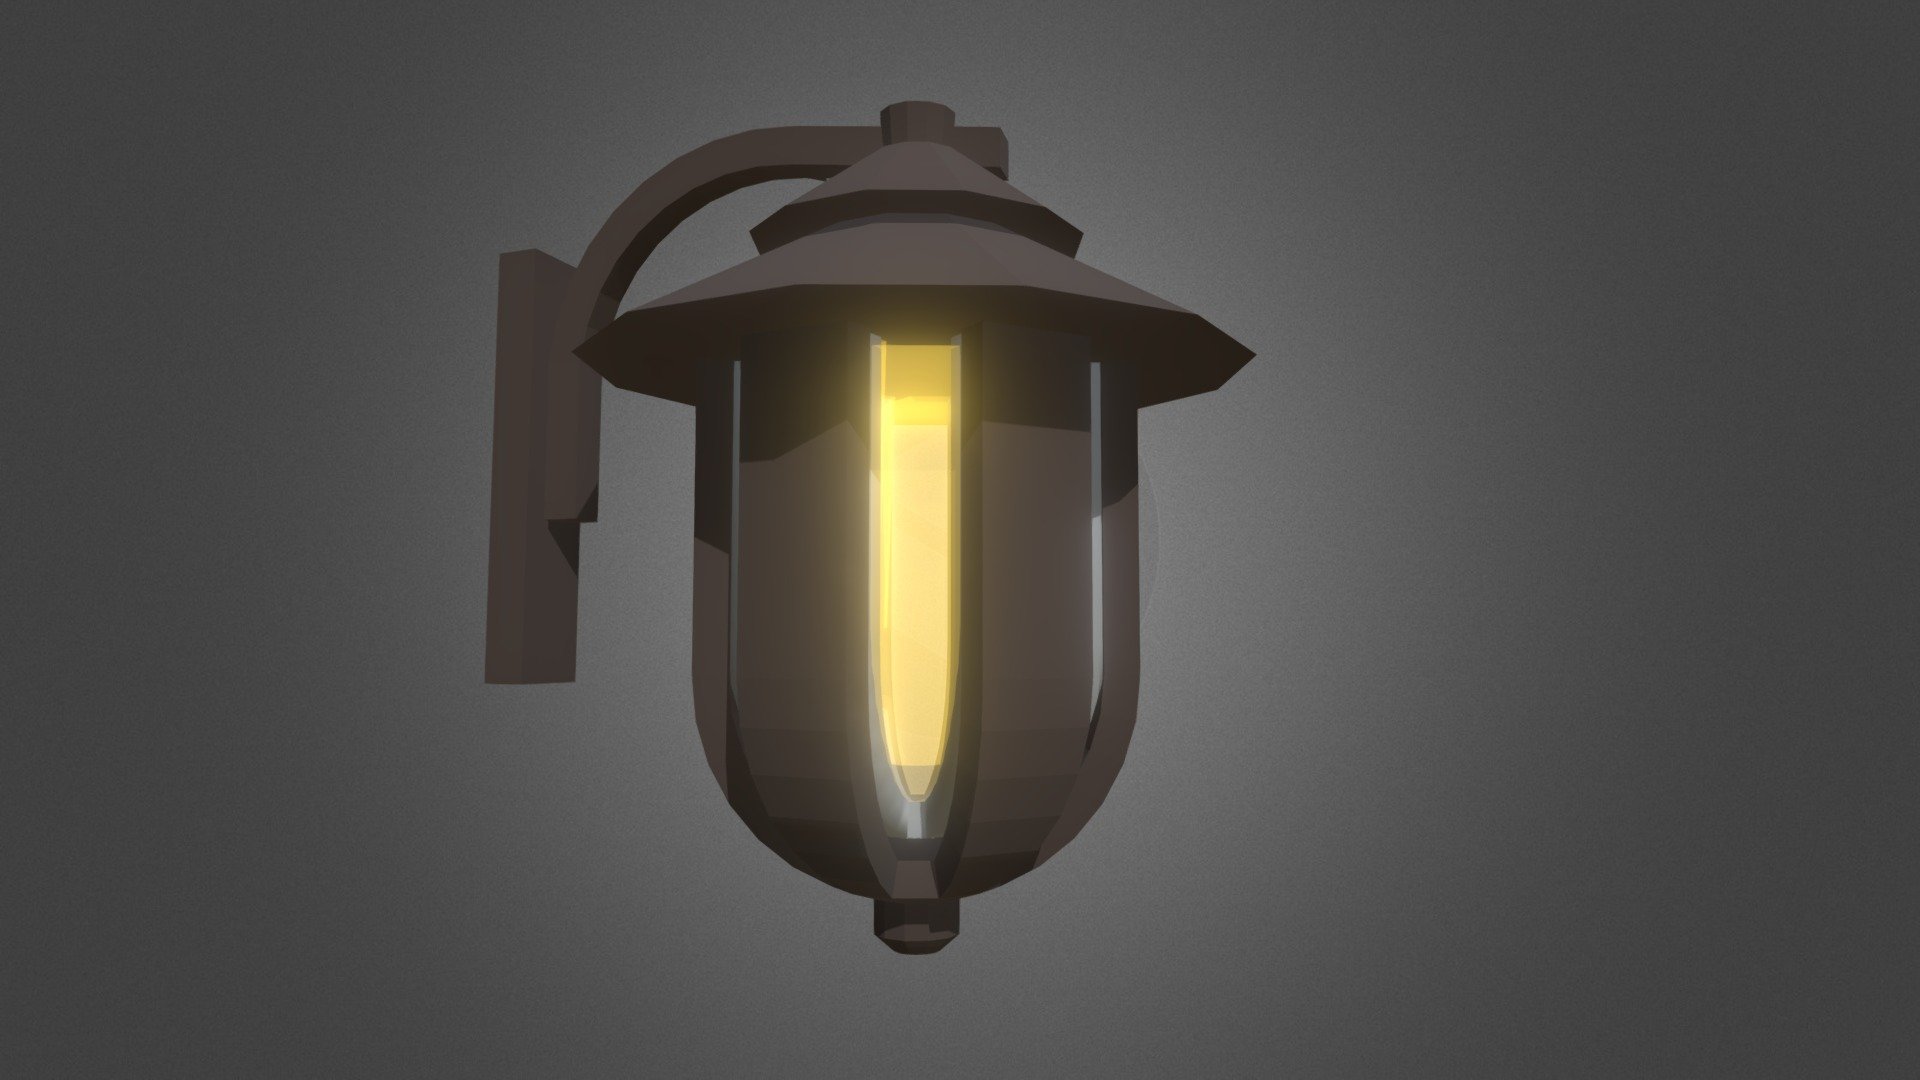 Simple wall hanging lantern.
Modeled in Blender July 2020, free to use 3d model